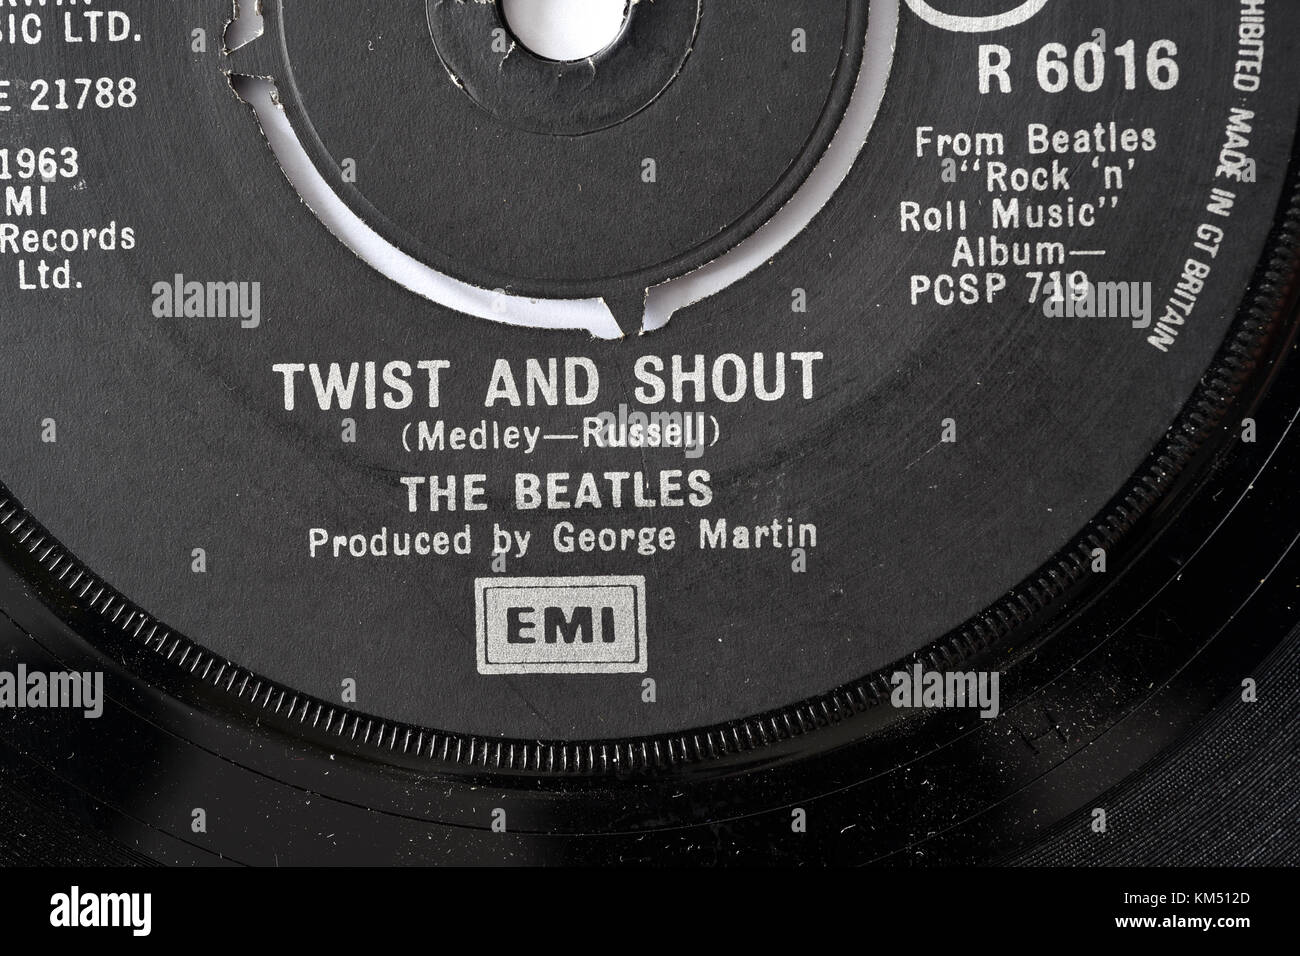 Beatles Twist and Shout seven inch single label details Stock Photo